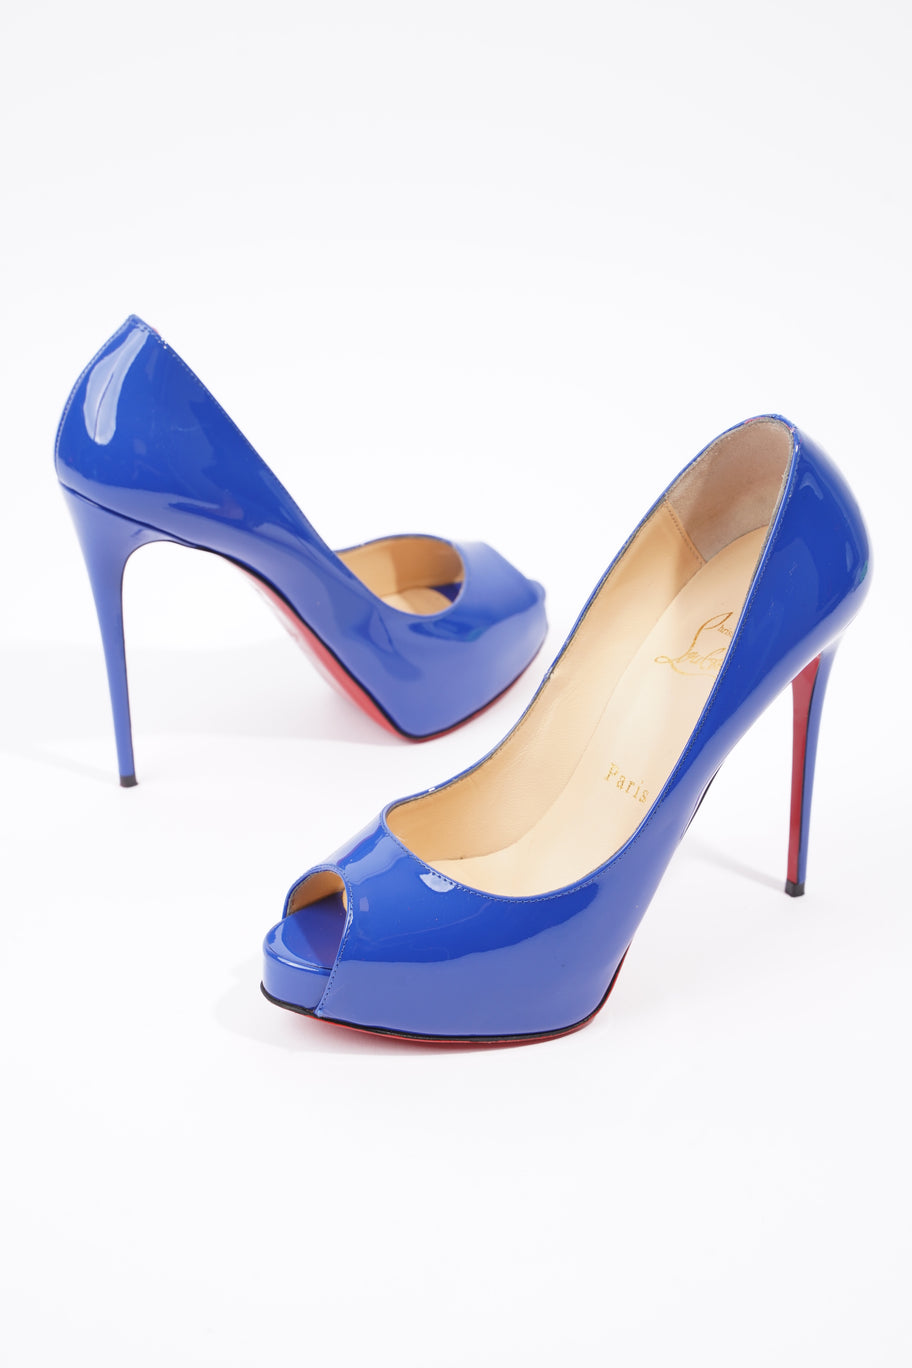 New Very Prive Heels 120 Blue Patent Leather EU 37.5 UK 4.5 Image 12